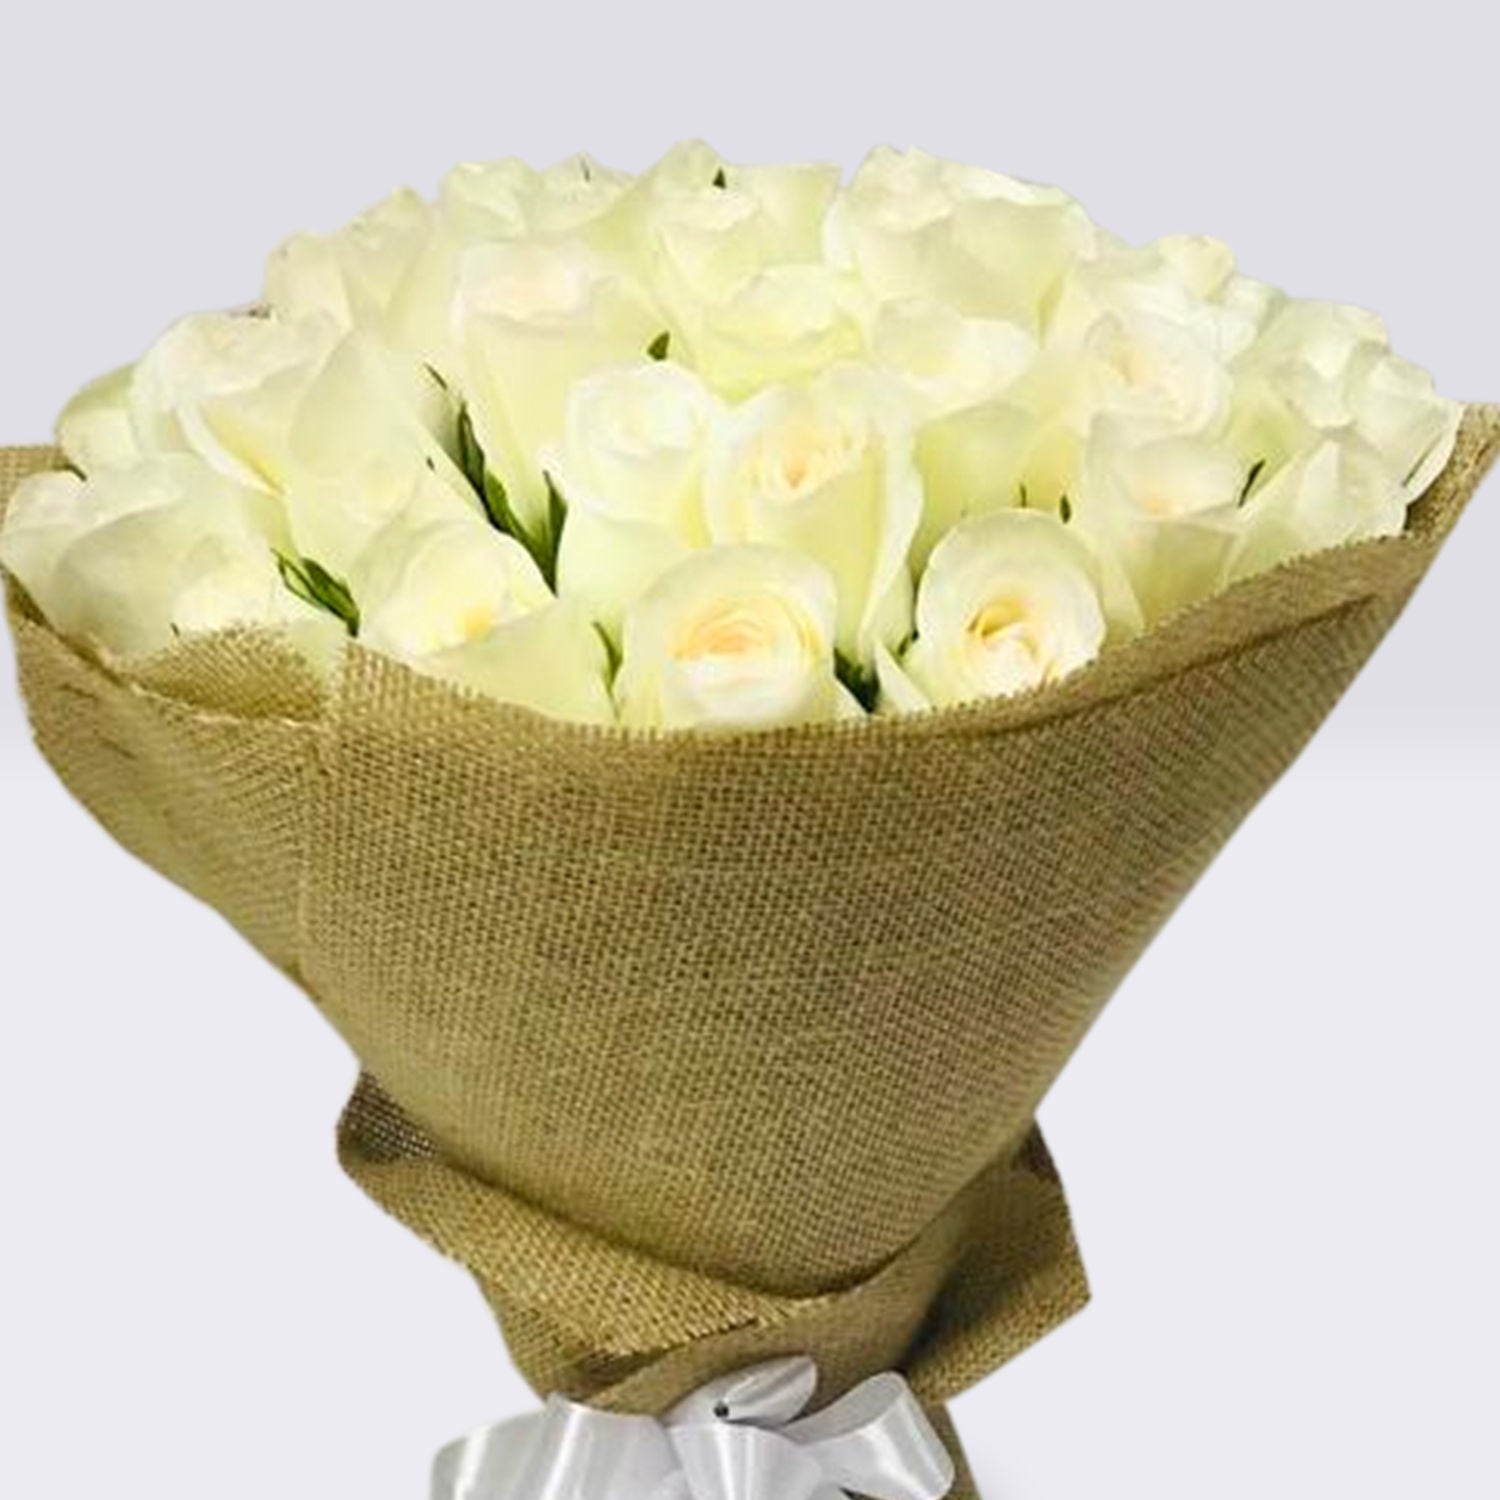 50 White Roses Bouquet